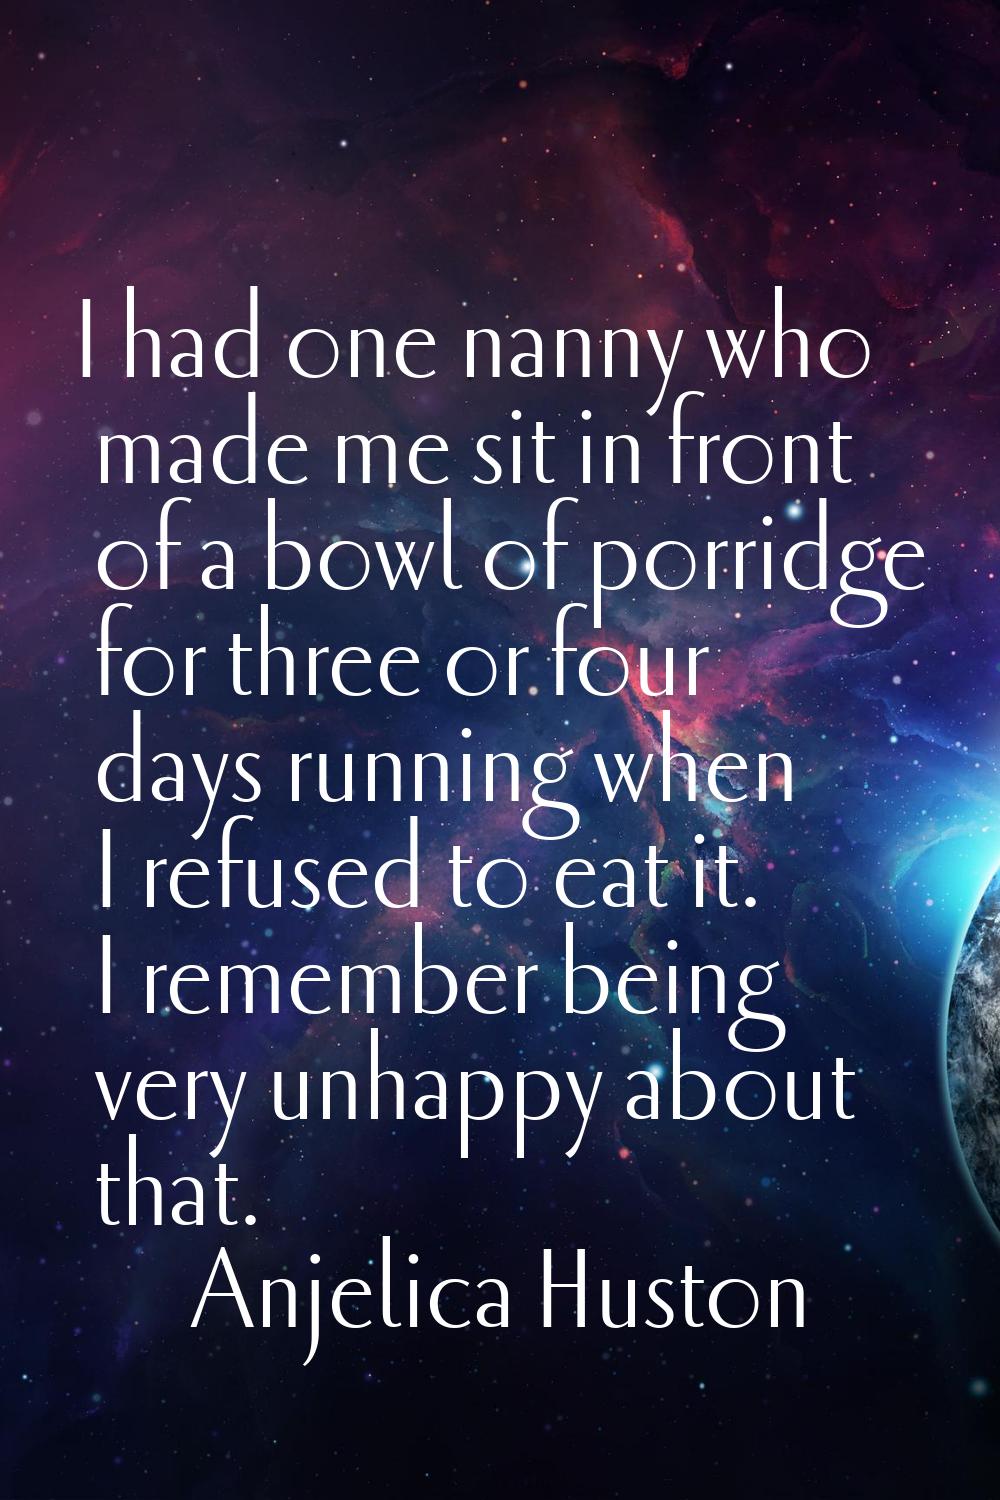 I had one nanny who made me sit in front of a bowl of porridge for three or four days running when 